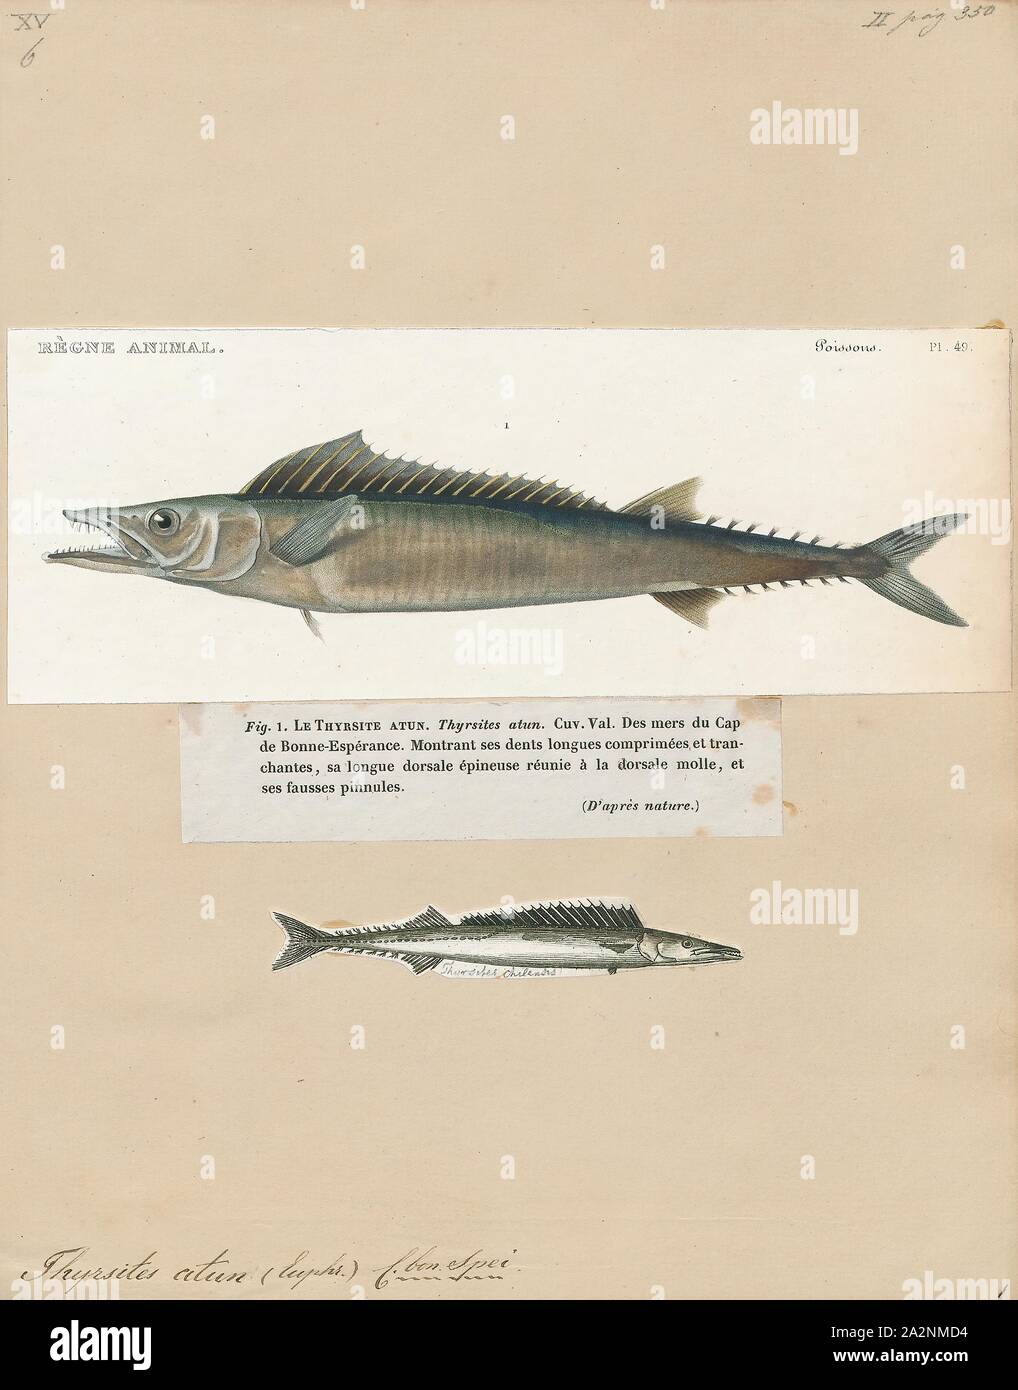 Thyrsites atun, Print, Thyrsites atun (Euphrasén, 1791), the snoek, is a long, thin species of snake mackerel found in the seas of the Southern Hemisphere. This fish can reach a length of 200 centimetres (79 in) SL though most do not exceed 75 centimetres (30 in) SL. The maximum recorded weight for this species is 6 kilograms (13 lb). It is very important to commercial fisheries and is also a popular game fish. It is currently the only known member of its genus. It is also known in Australasia as barracouta though it is not closely related to the barracuda., 1700-1880 Stock Photo